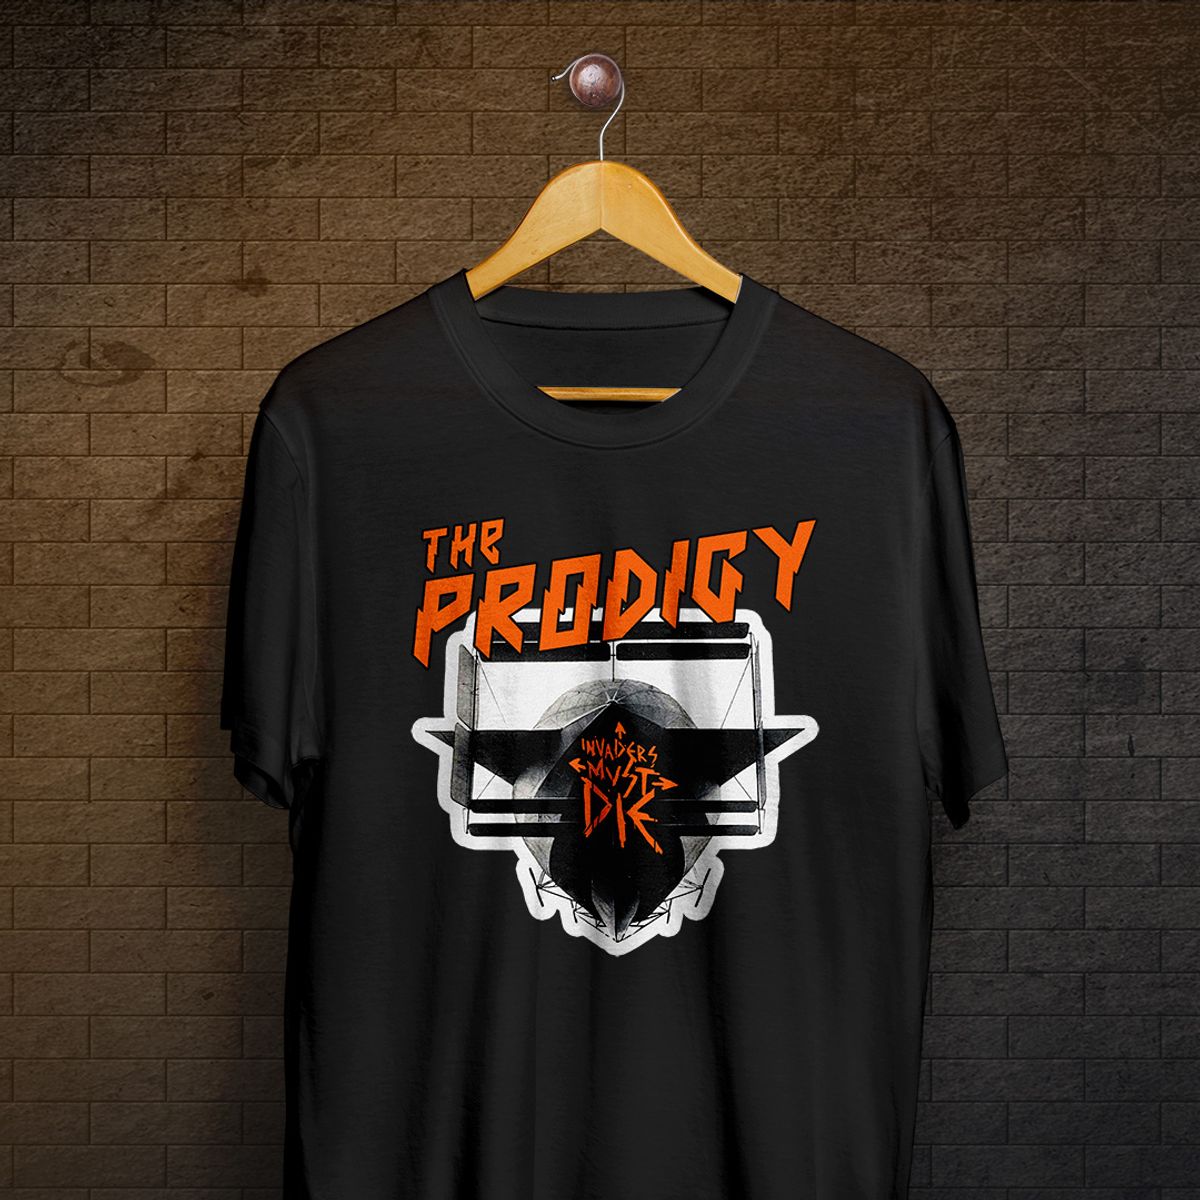 Nome do produto: Camiseta The Prodigy - Invaders Must Die